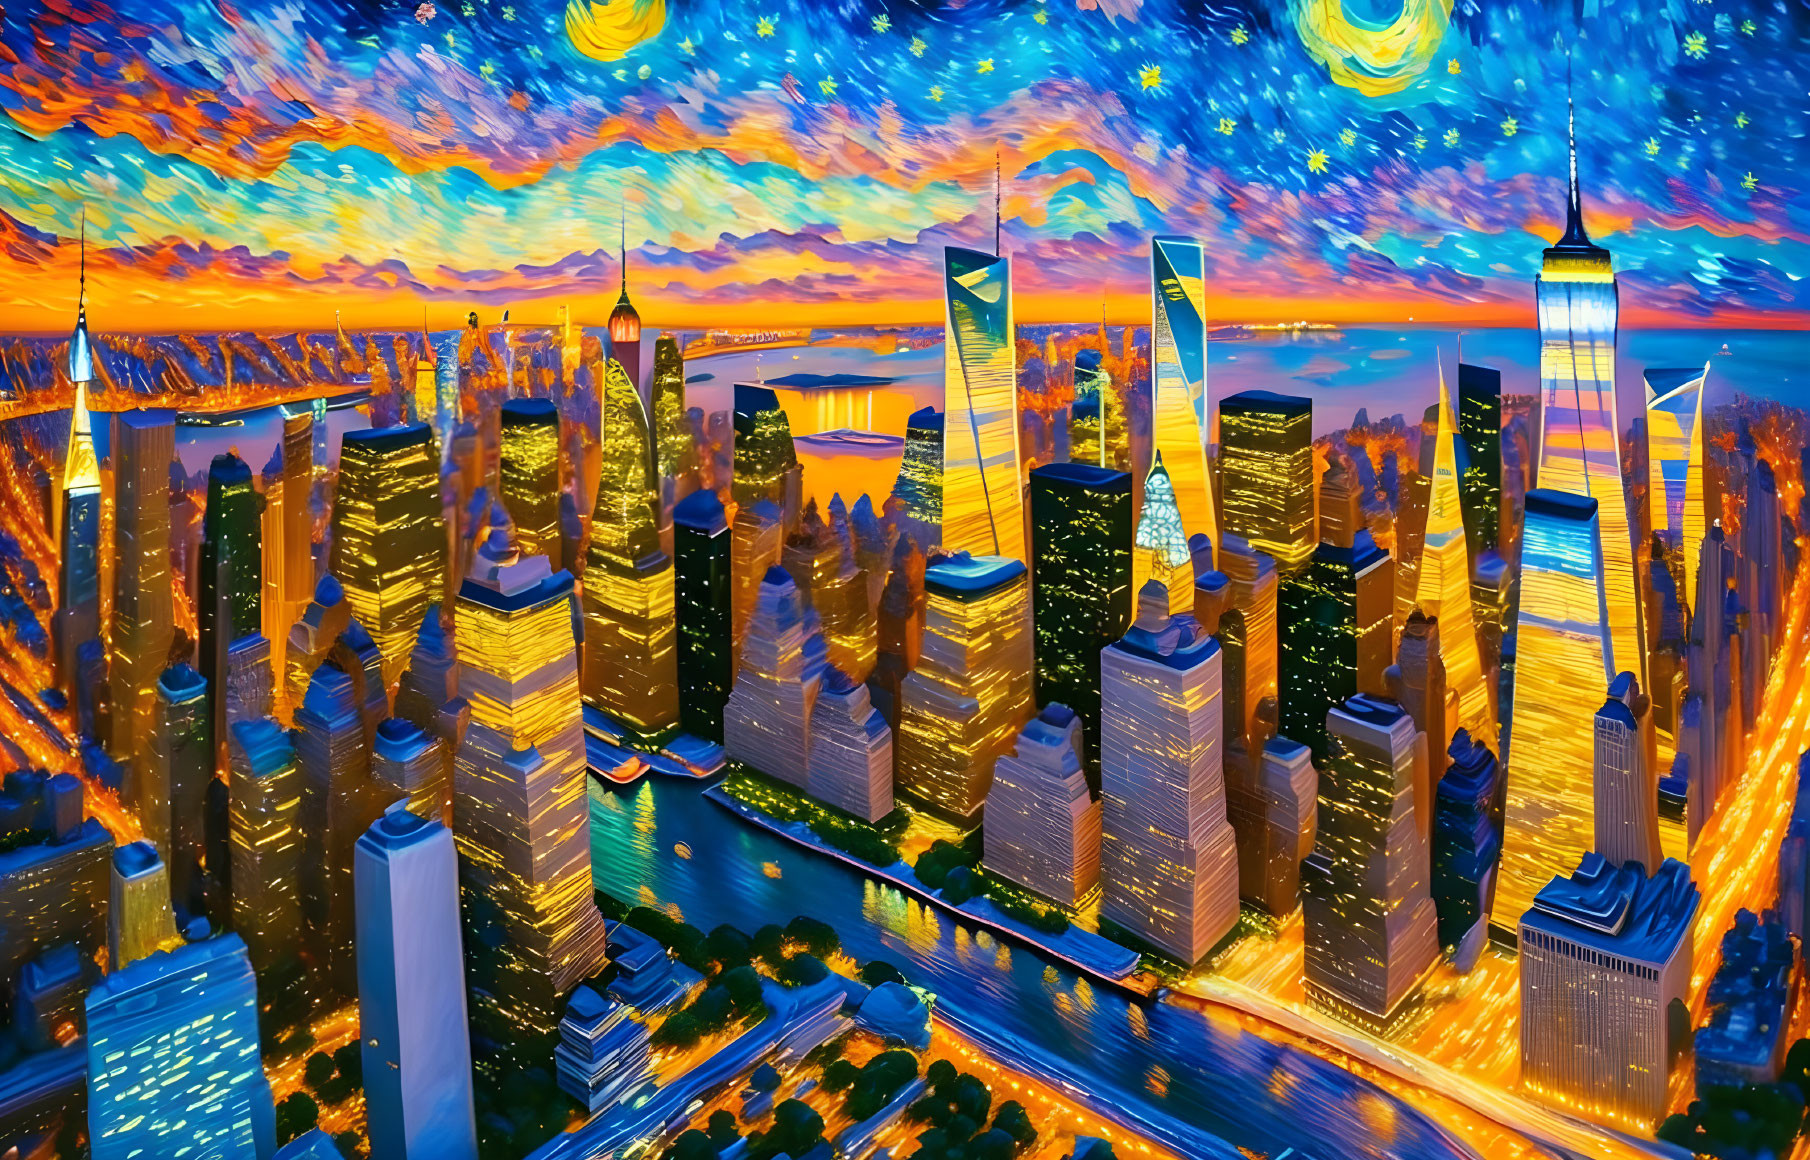 Colorful City Skyline Painting with Exaggerated Features and Swirling Sky Patterns